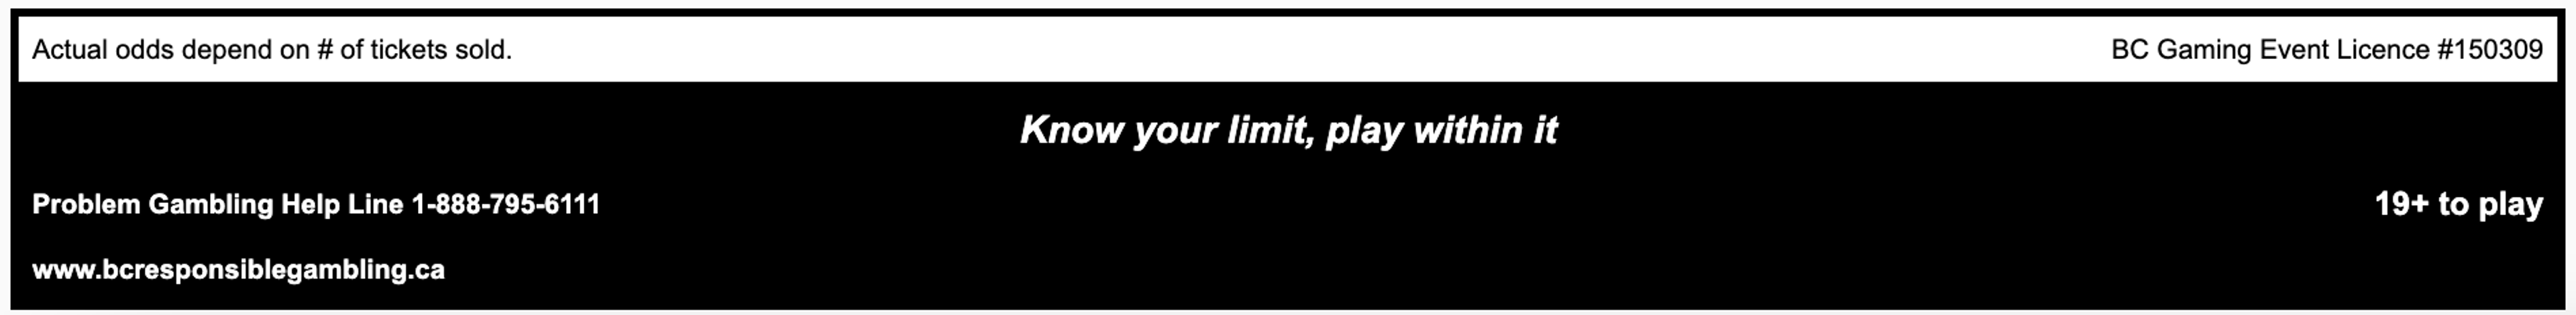 Know Your Limit, Play Within It - BC Gaming Event Licence #150309